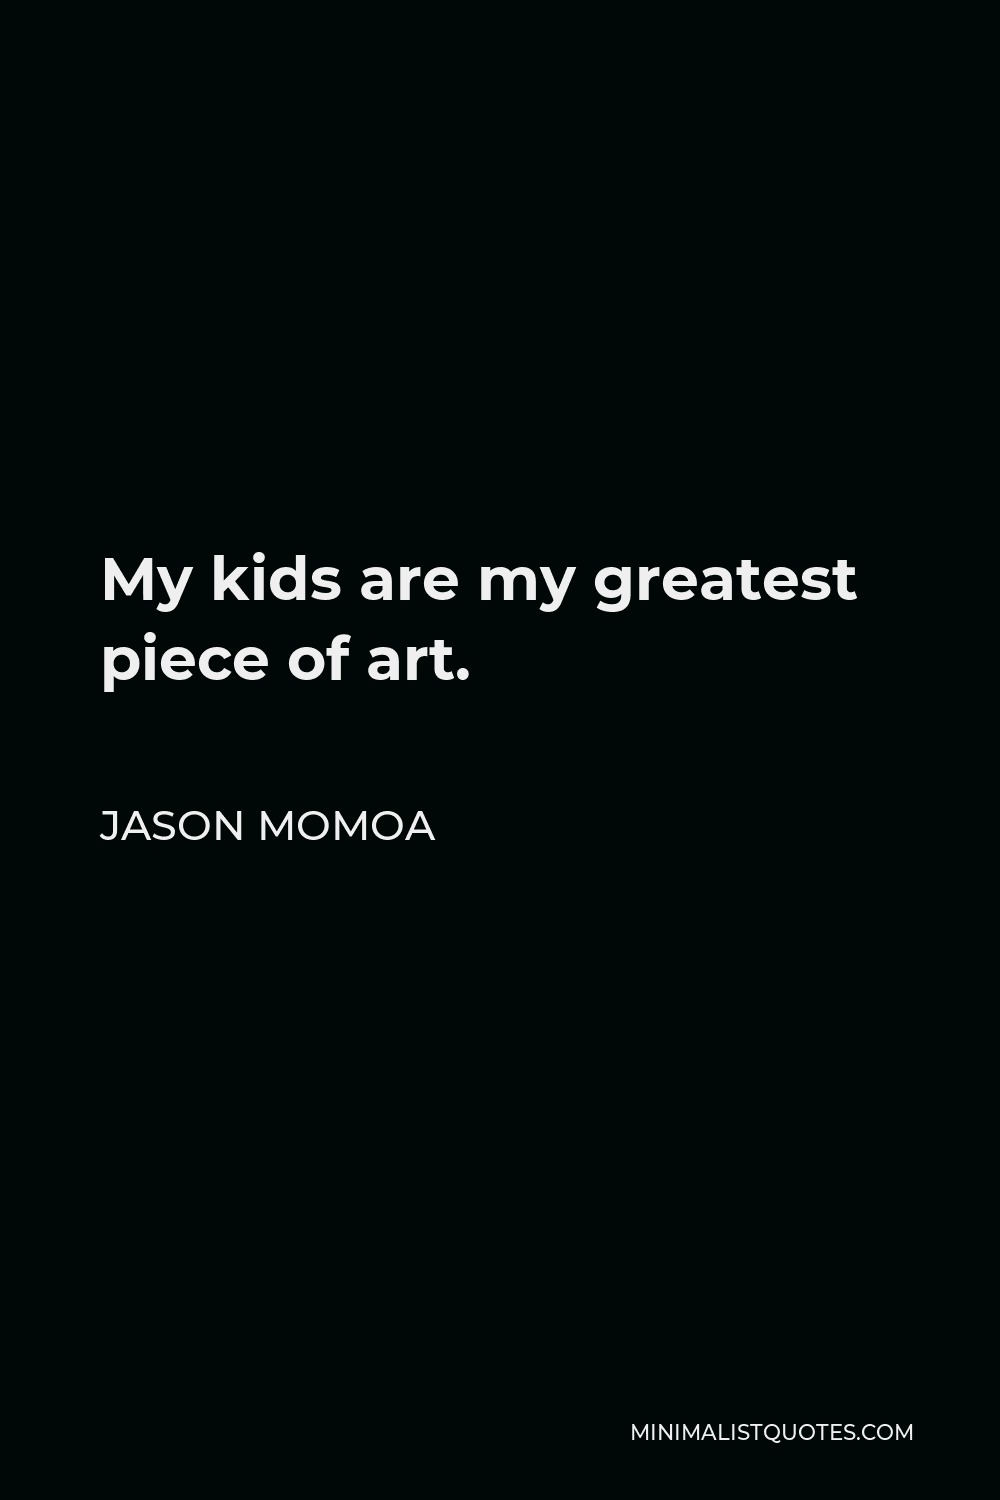 Jason Momoa Quote - My kids are my greatest piece of art.